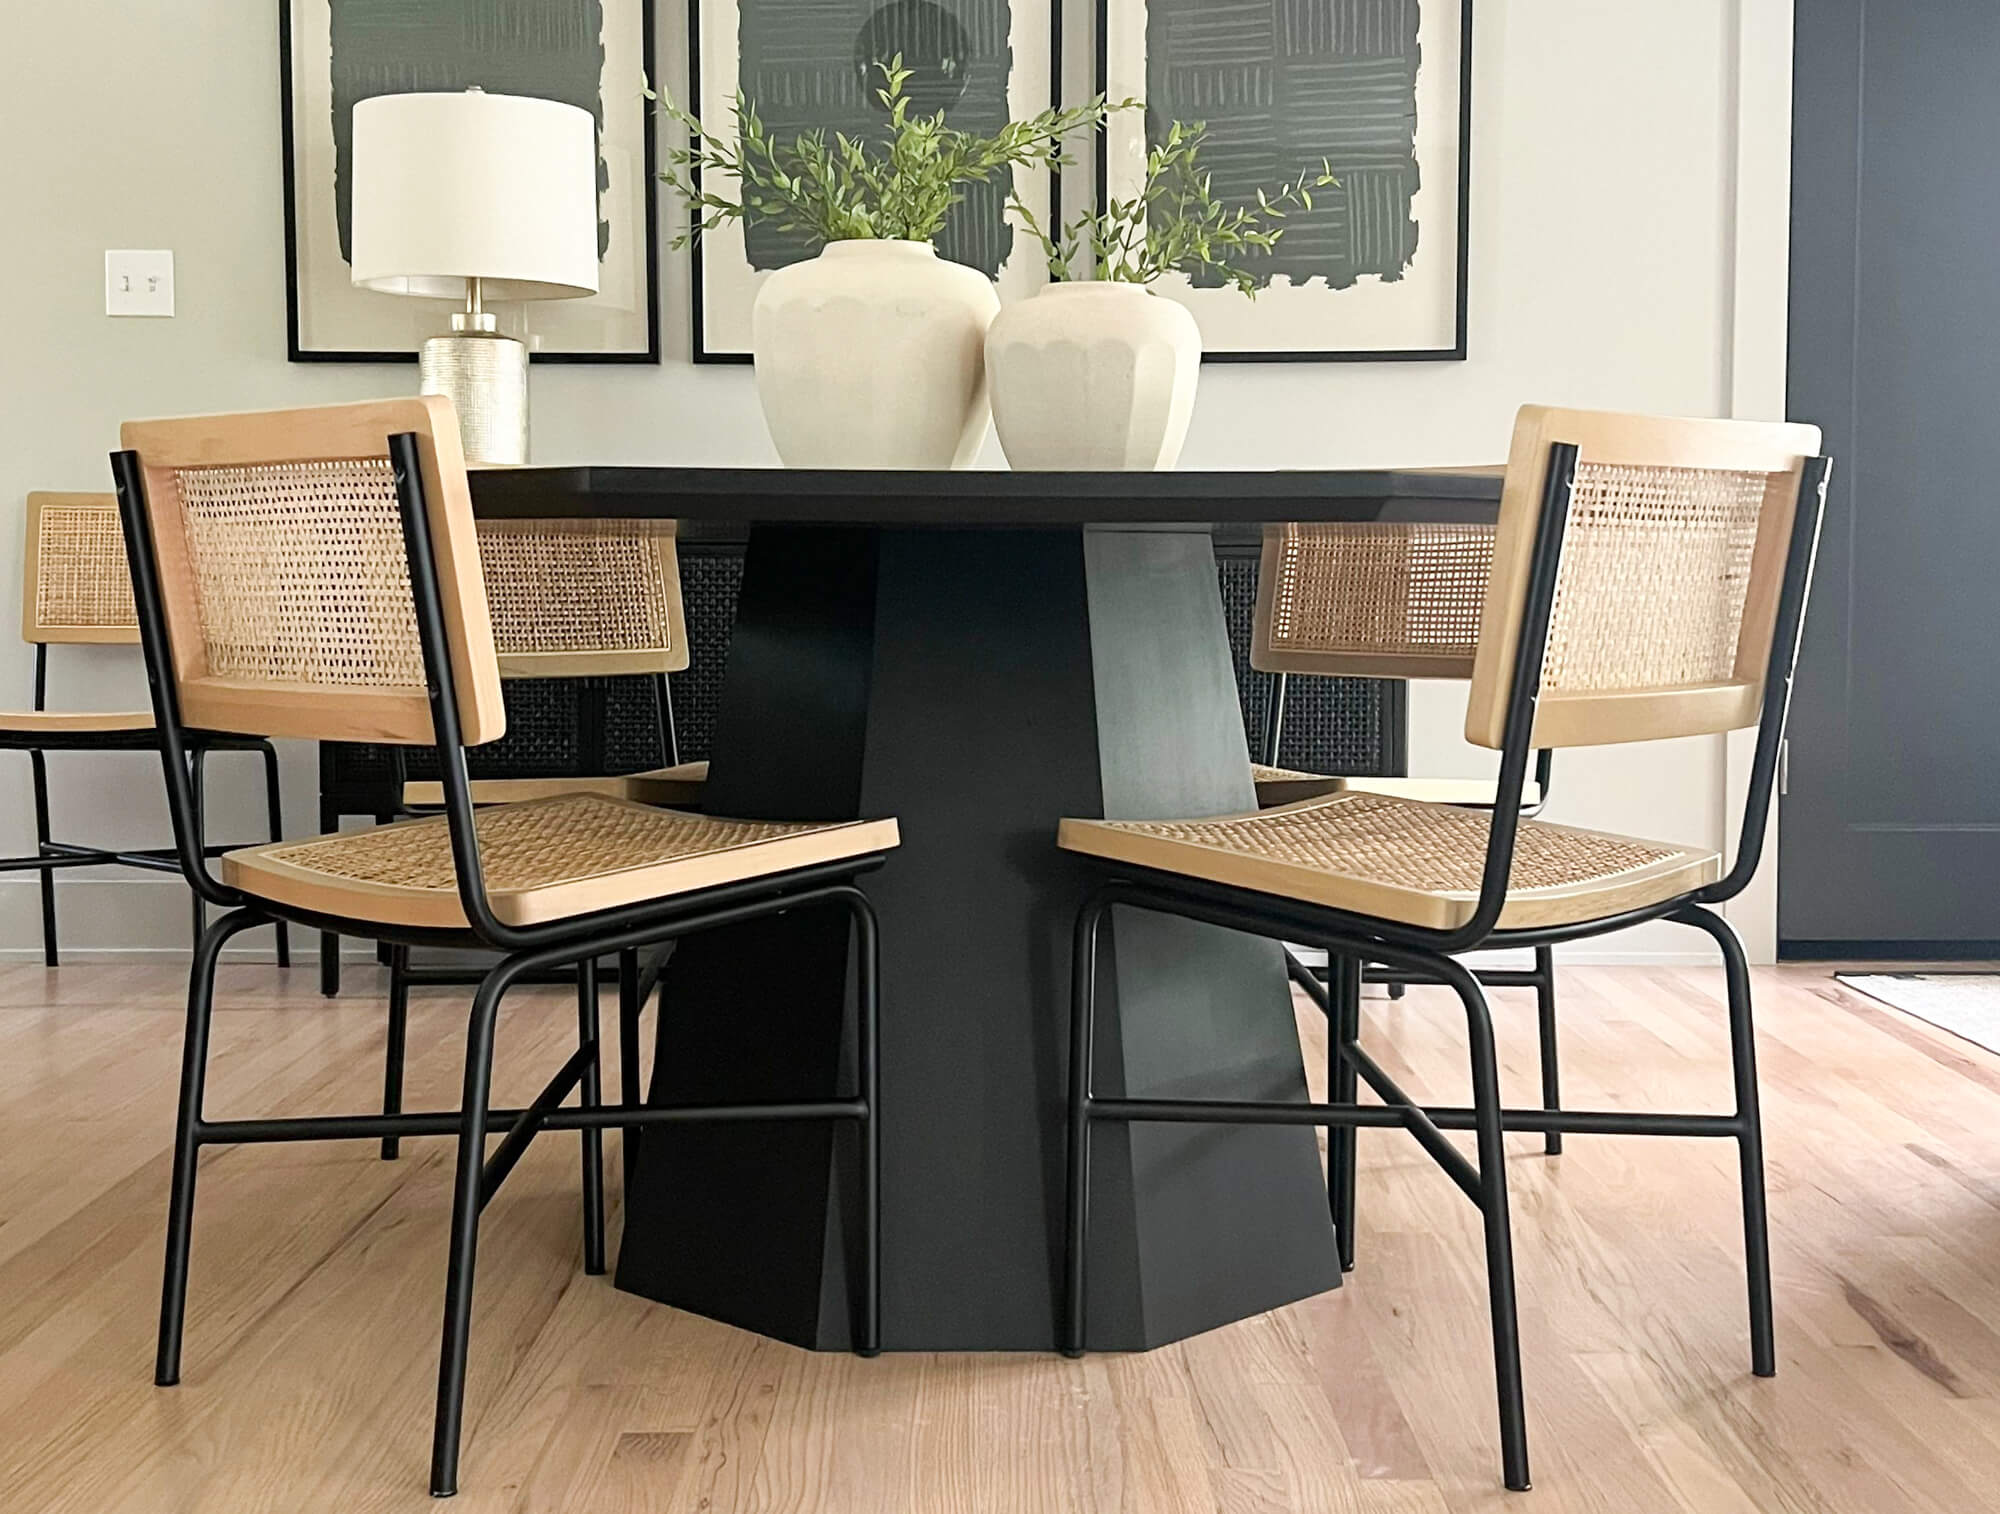 A black octagon shaped maple table with four chairs. Finished with Rubio Monocoat hardwax oil and stain products.